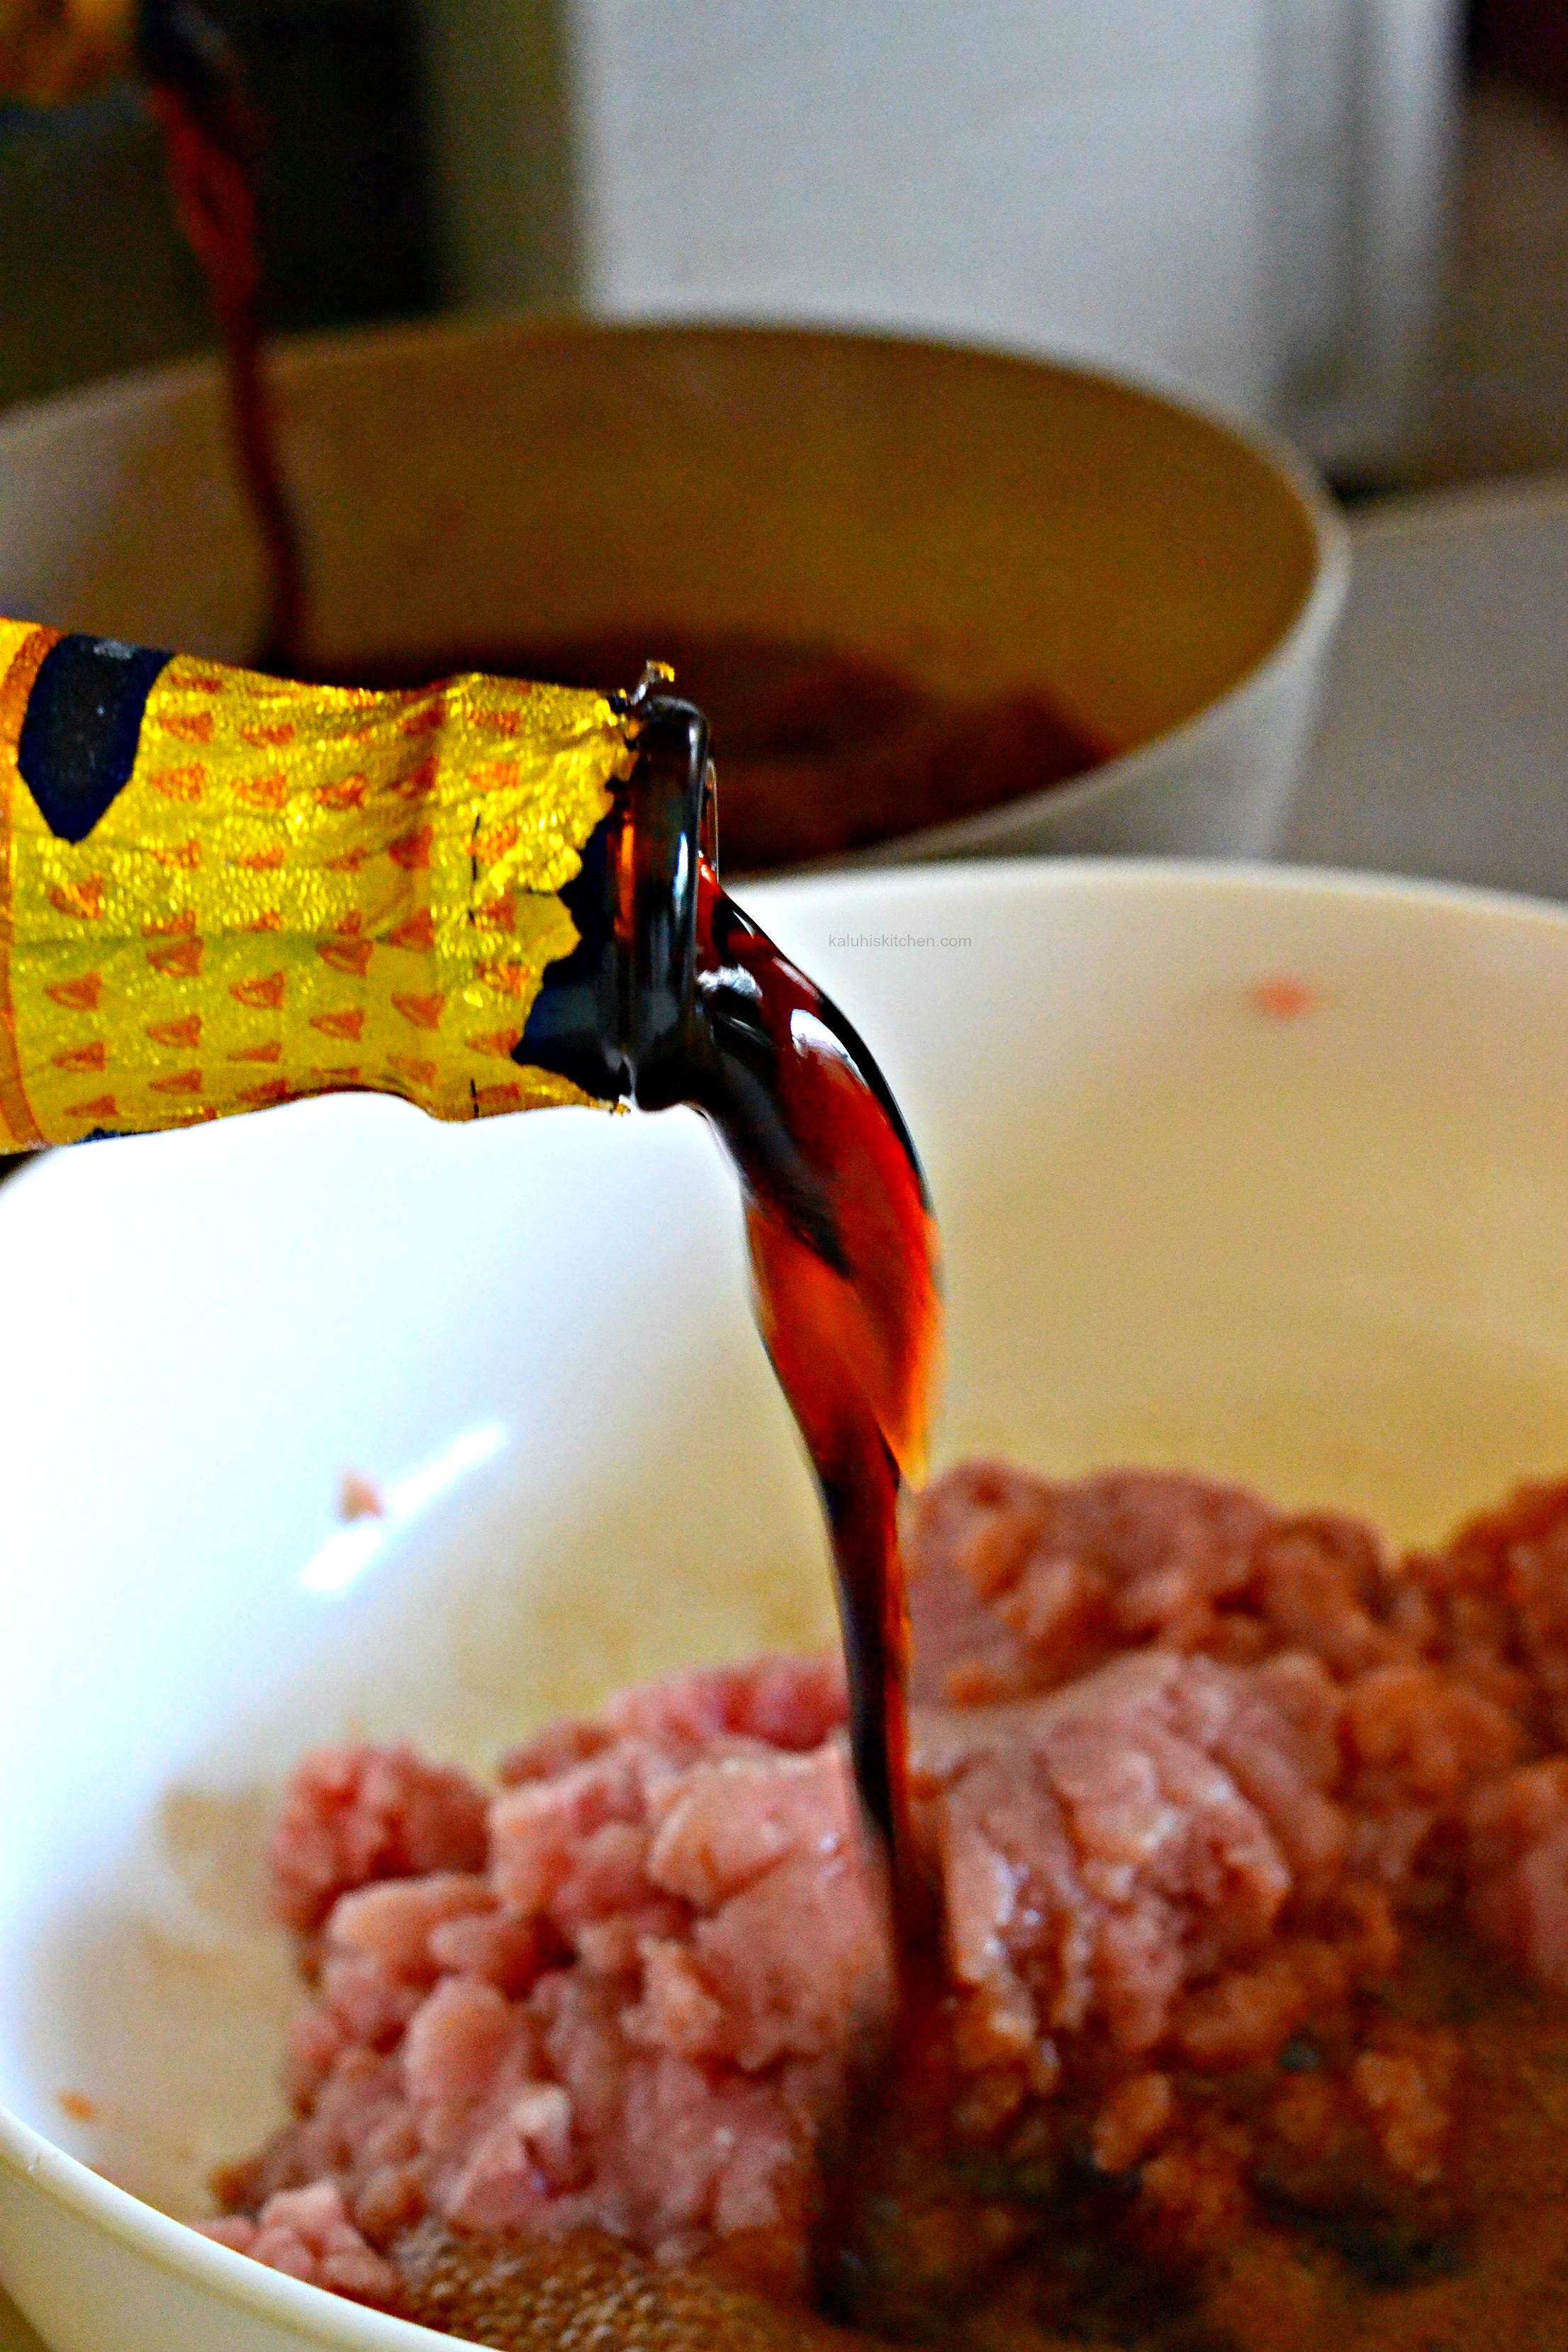 adding-the-guinness-inot-the-meat-marinade-will-add-a-more-layered-deeper-flavor-which-makes-the-burgers-alot-more-delicious-moist-and-layered-in-flavor_kaluhiskitchen-com